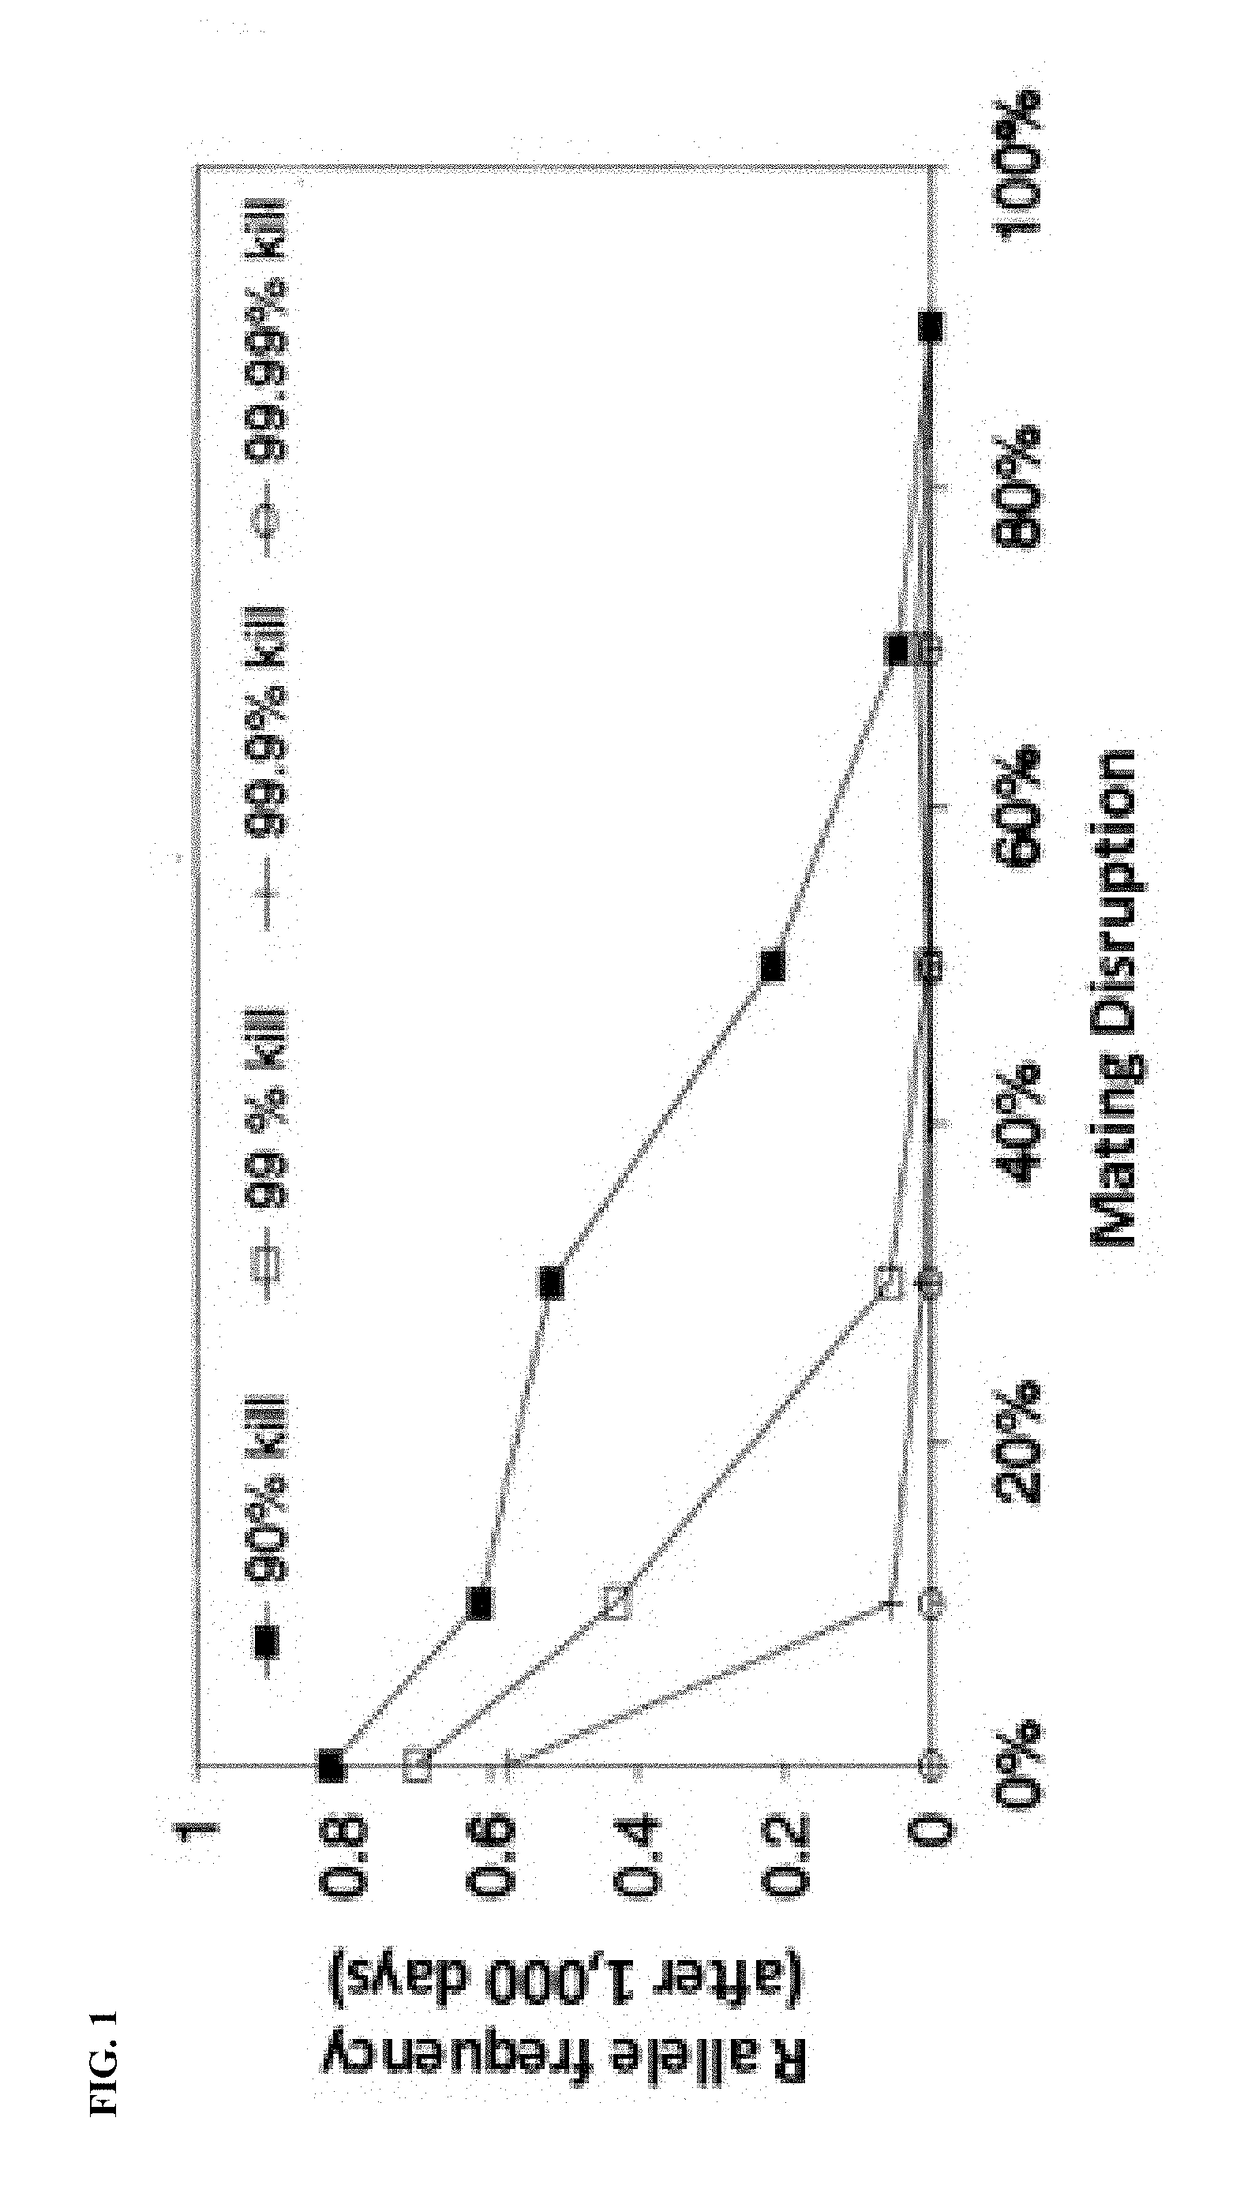 Method for managing resistance to insecticidal traits and chemicals using pheromones